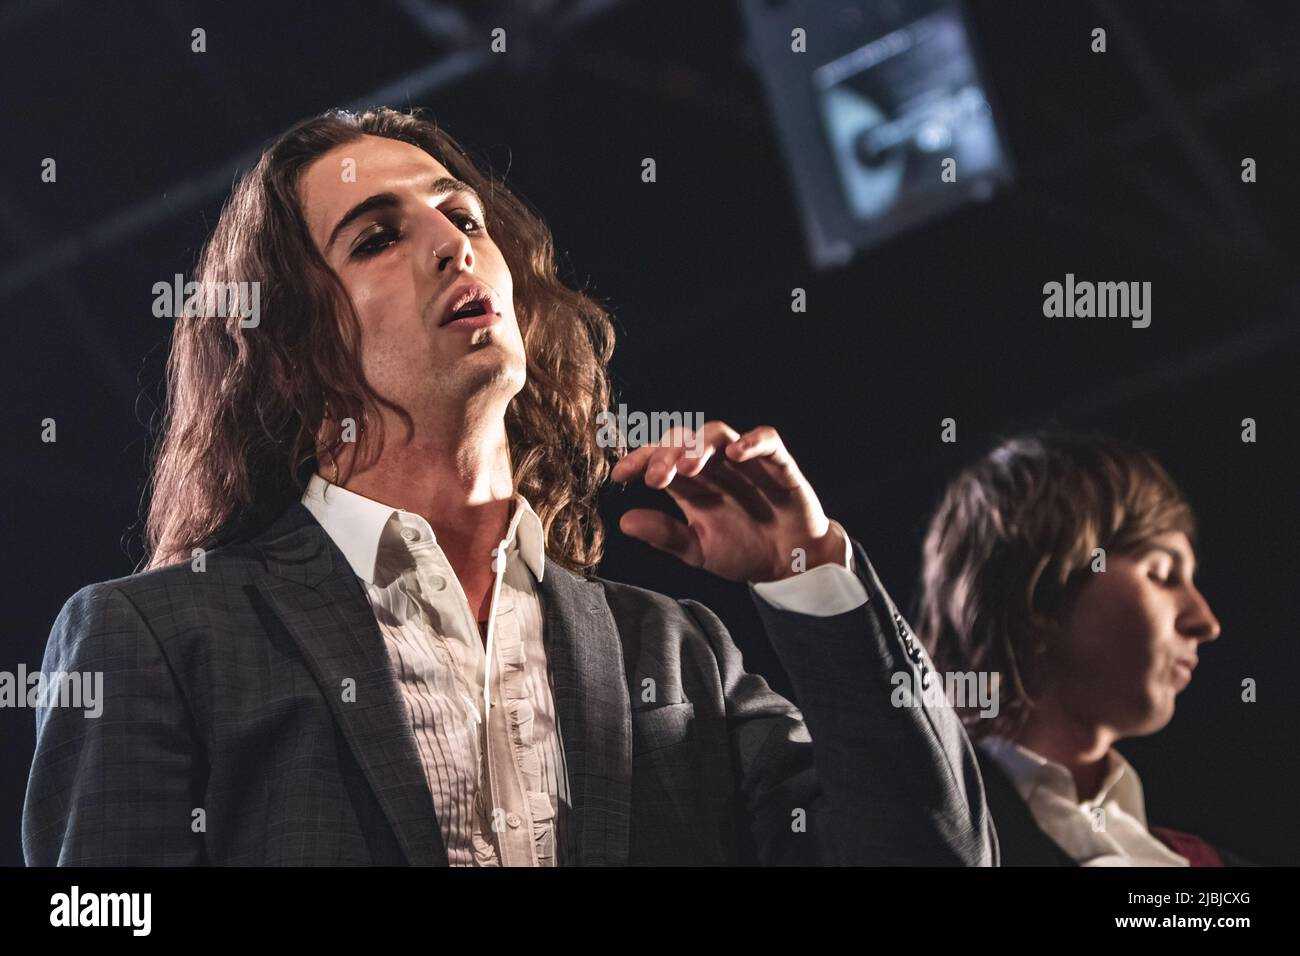 Damiano David and Thomas Raggi perform on stage with their band Maneskin at Atlantico in Rome. Stock Photo